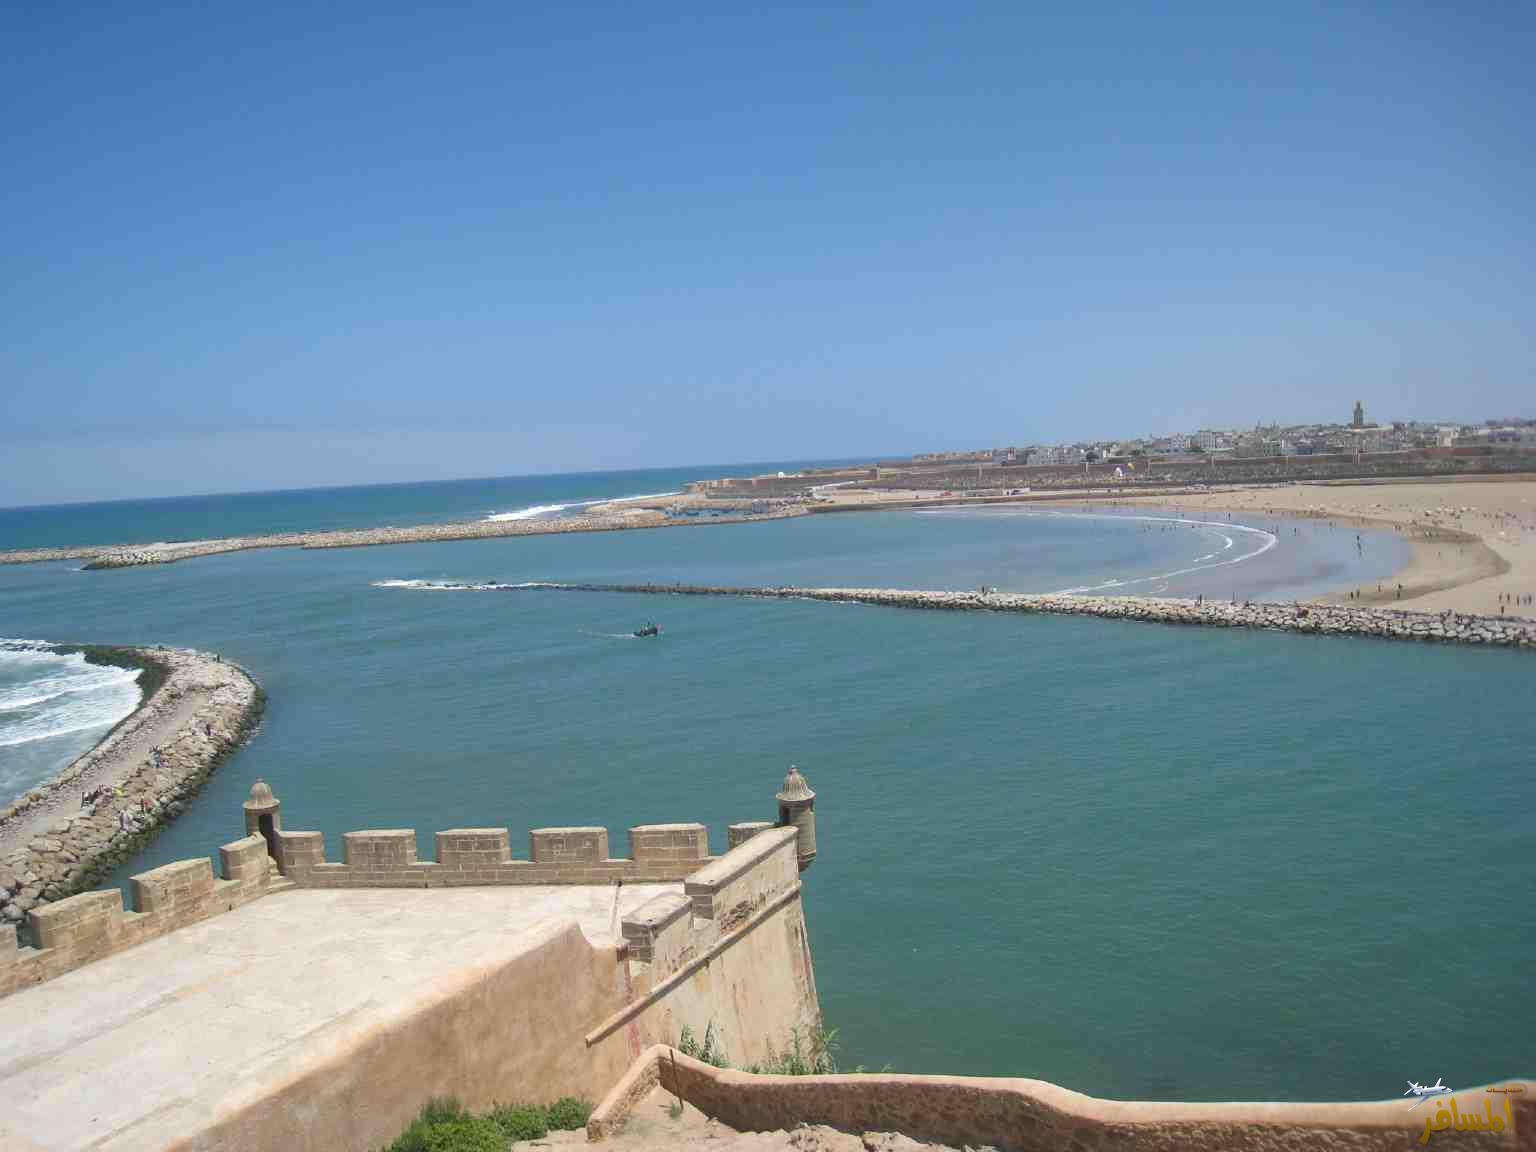 The Kasbah of the Udaya is one of the most beautiful tourist destinations in Morocco, Rabat